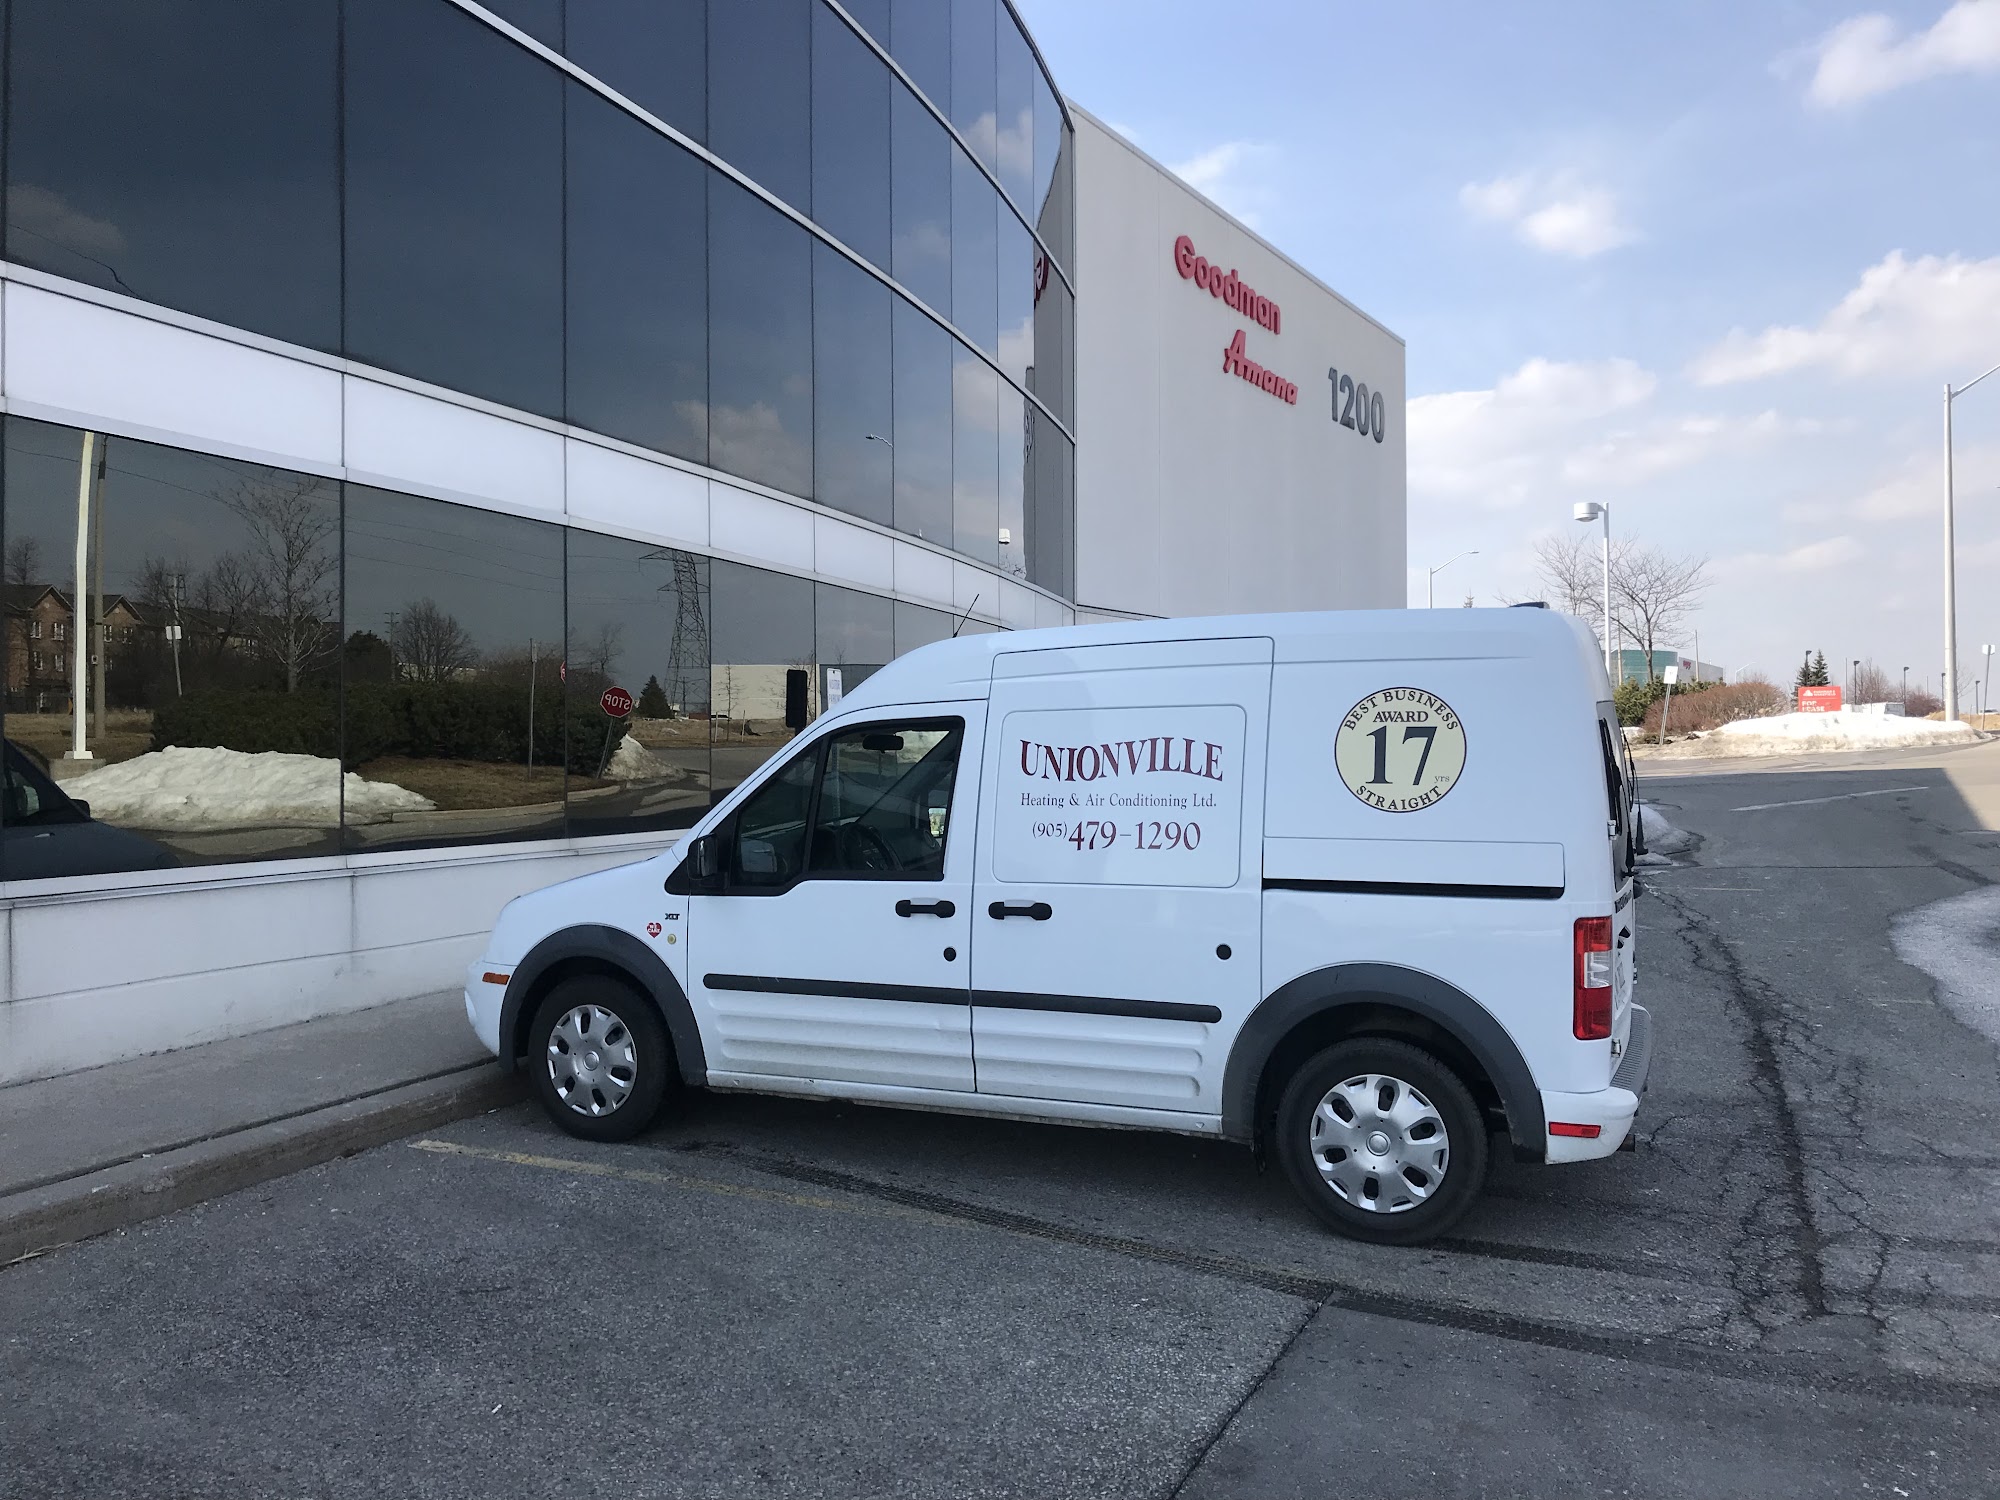 Unionville Heating & Air Conditioning